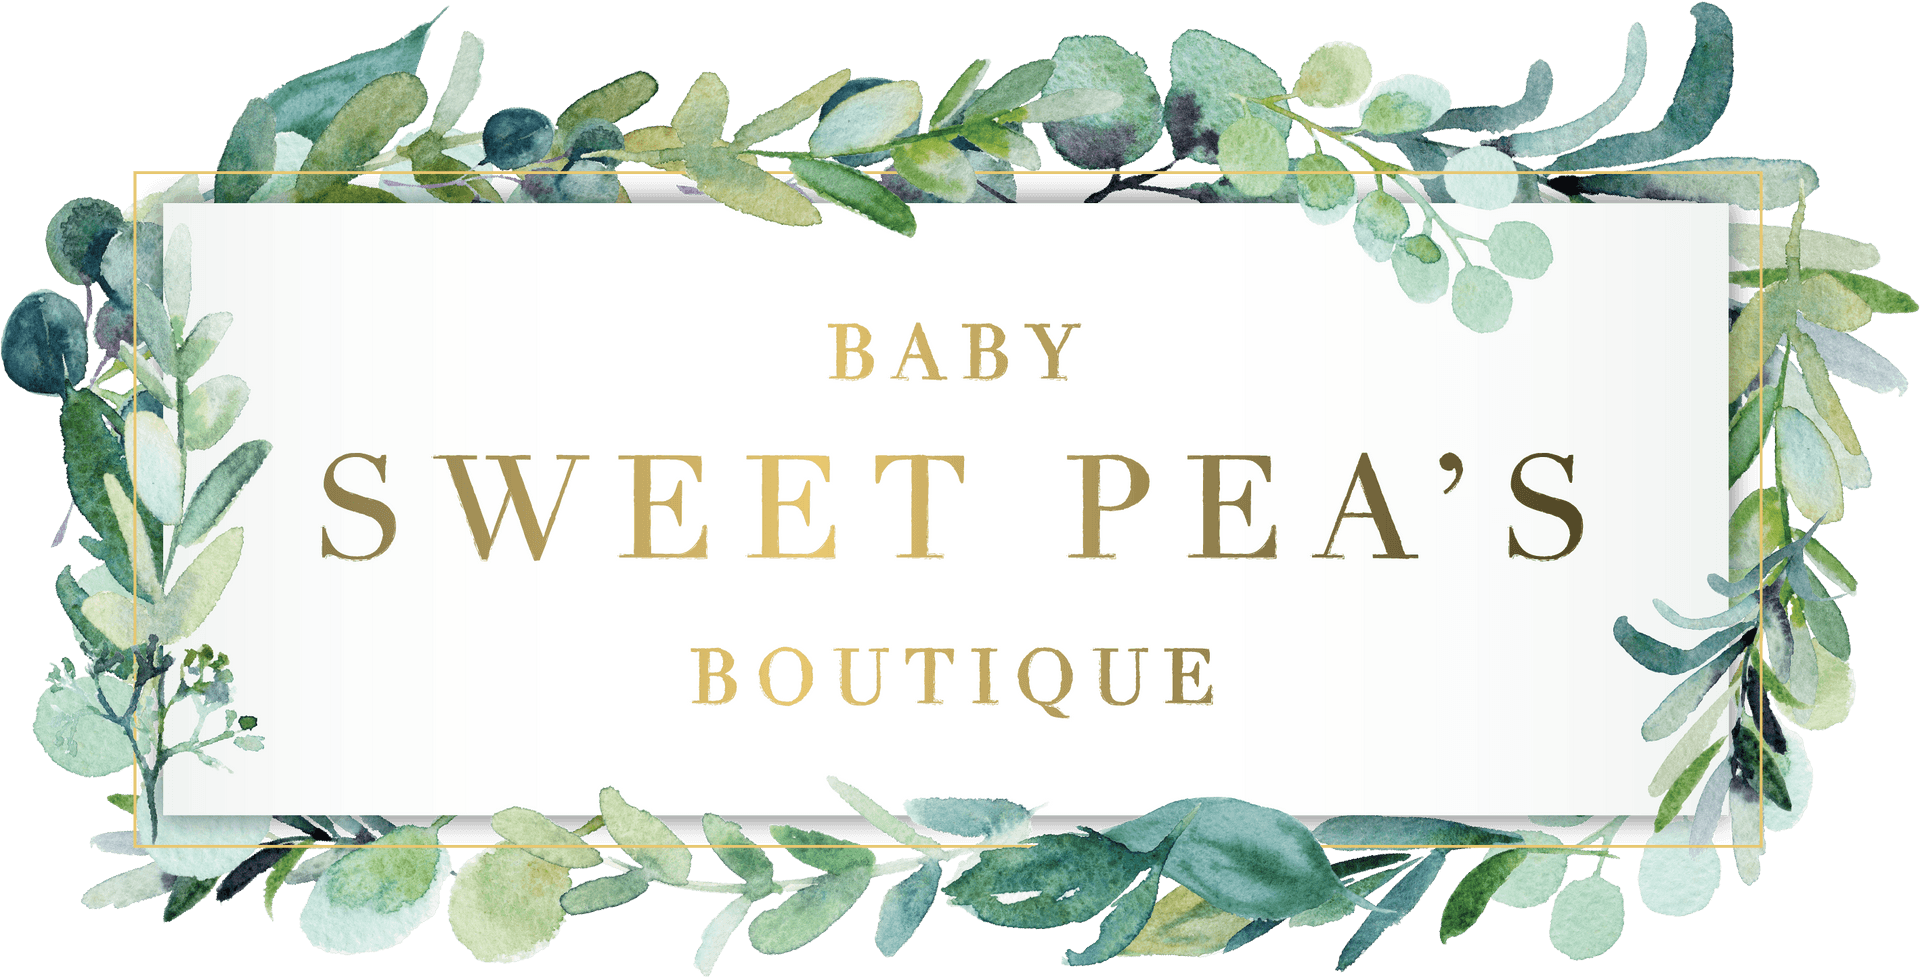 Sweet Peas Boutique Signage PNG image